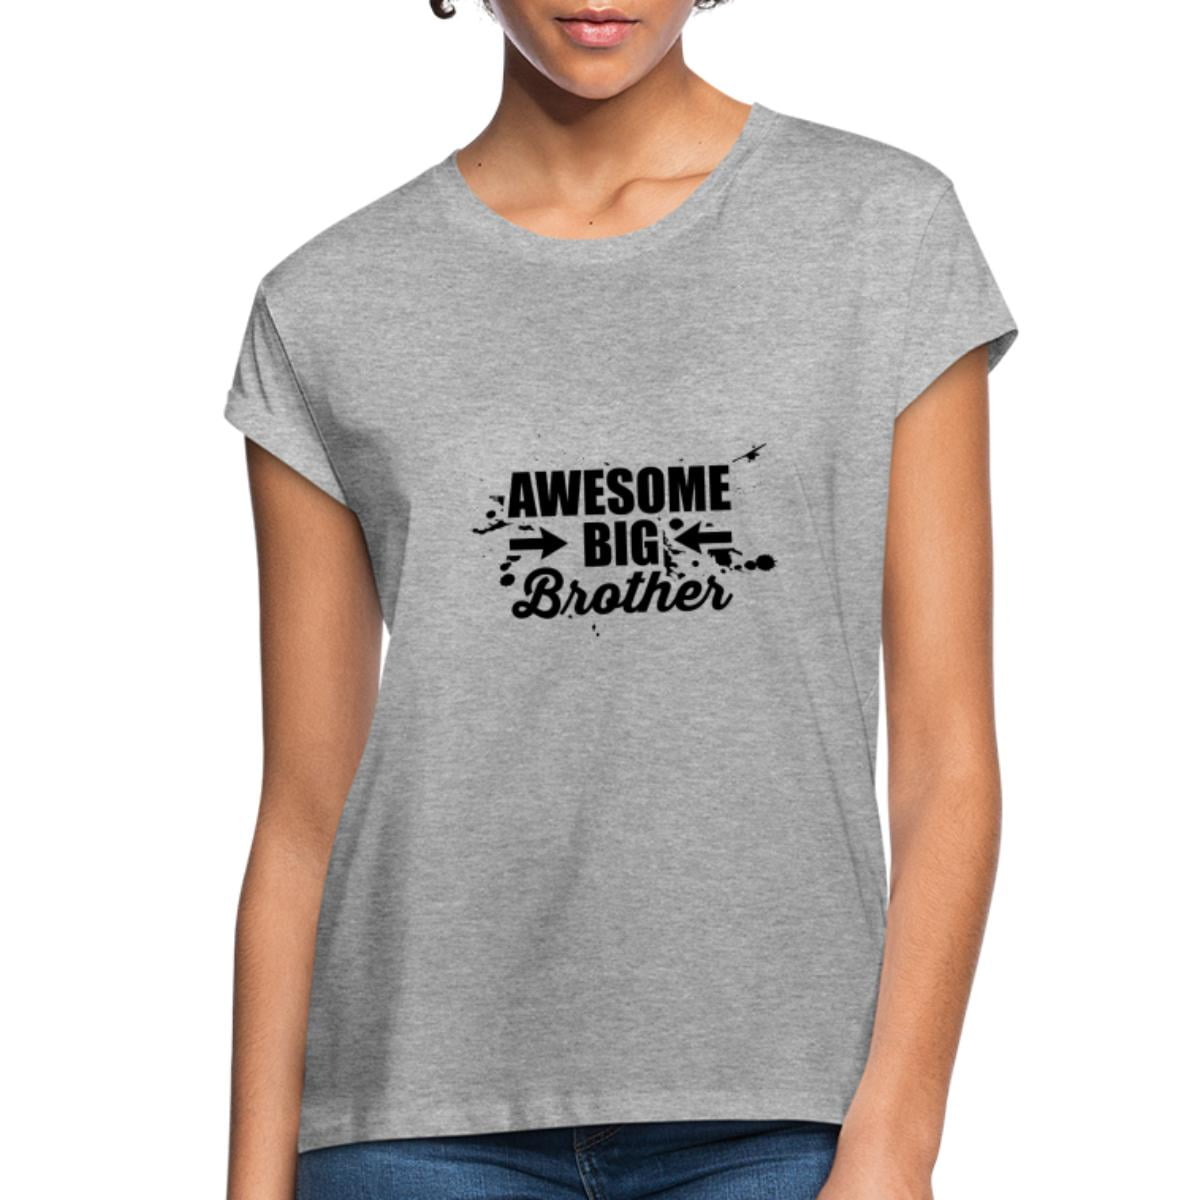 Awesome Big Brother V2 Women's Relaxed Fit T-Shirt Loose Tee - Walmart.com